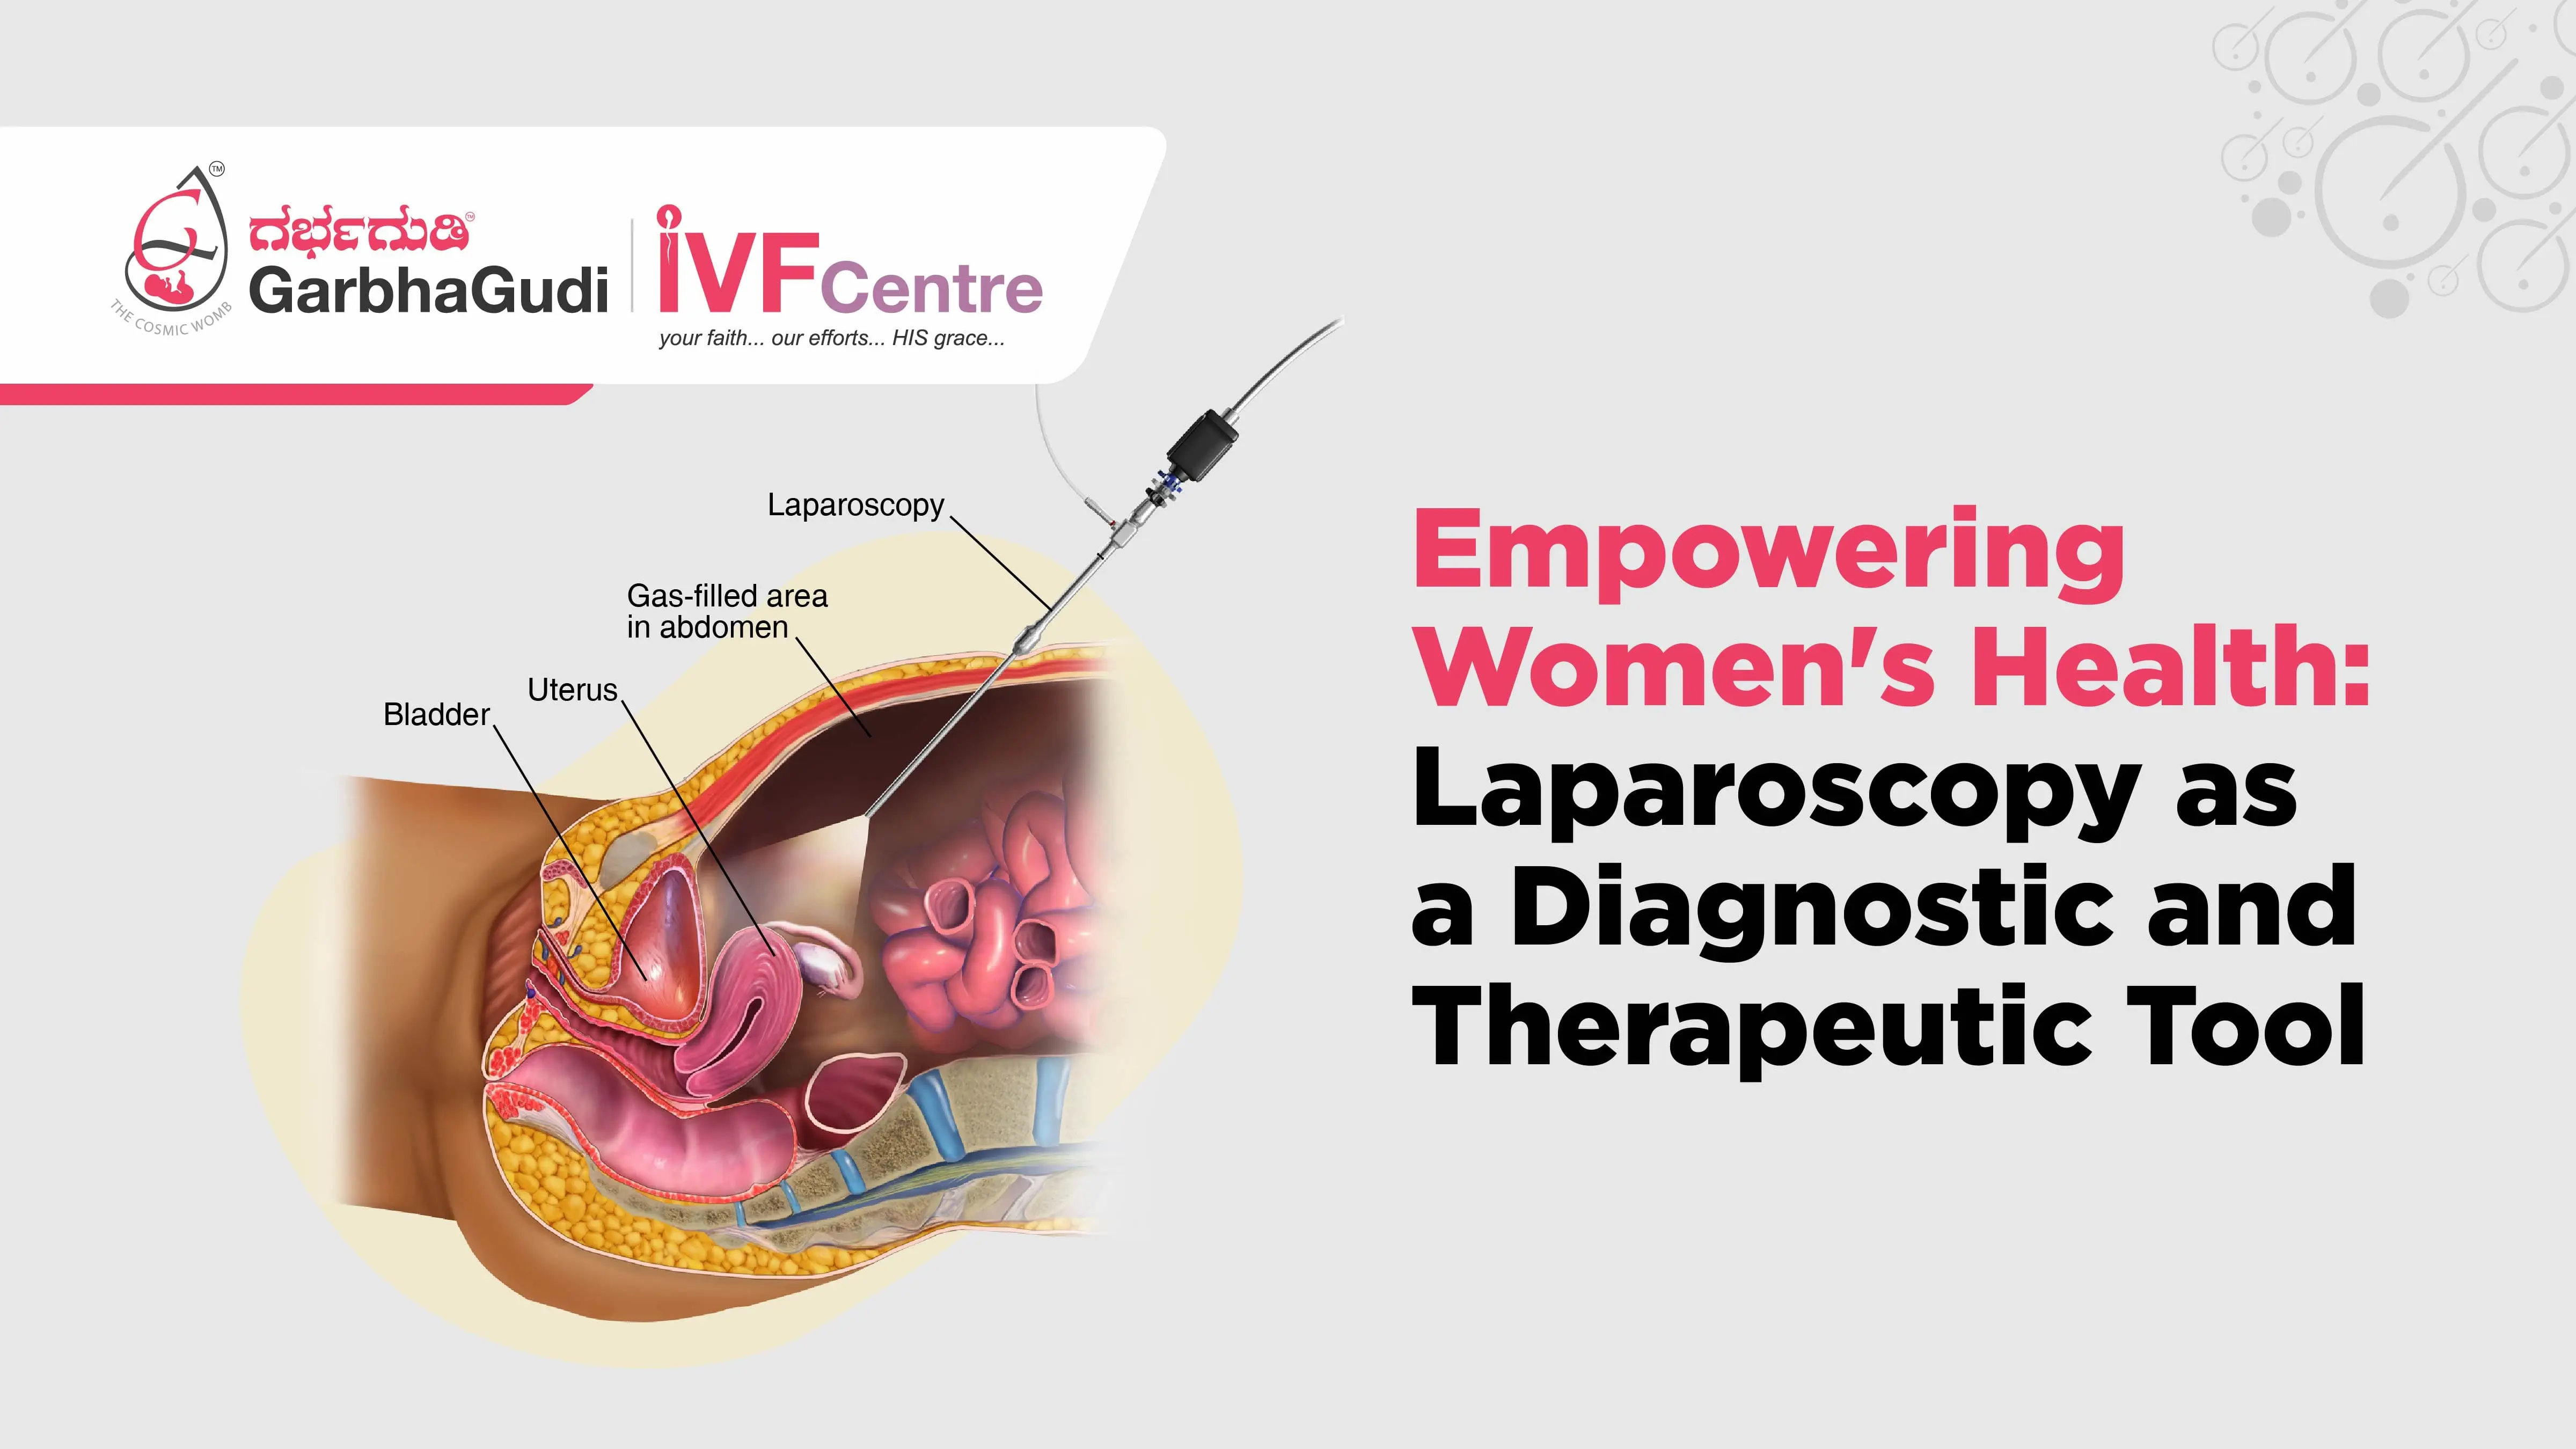 Empowering Women's Health: Laparoscopy as a Diagnostic and Therapeutic Tool